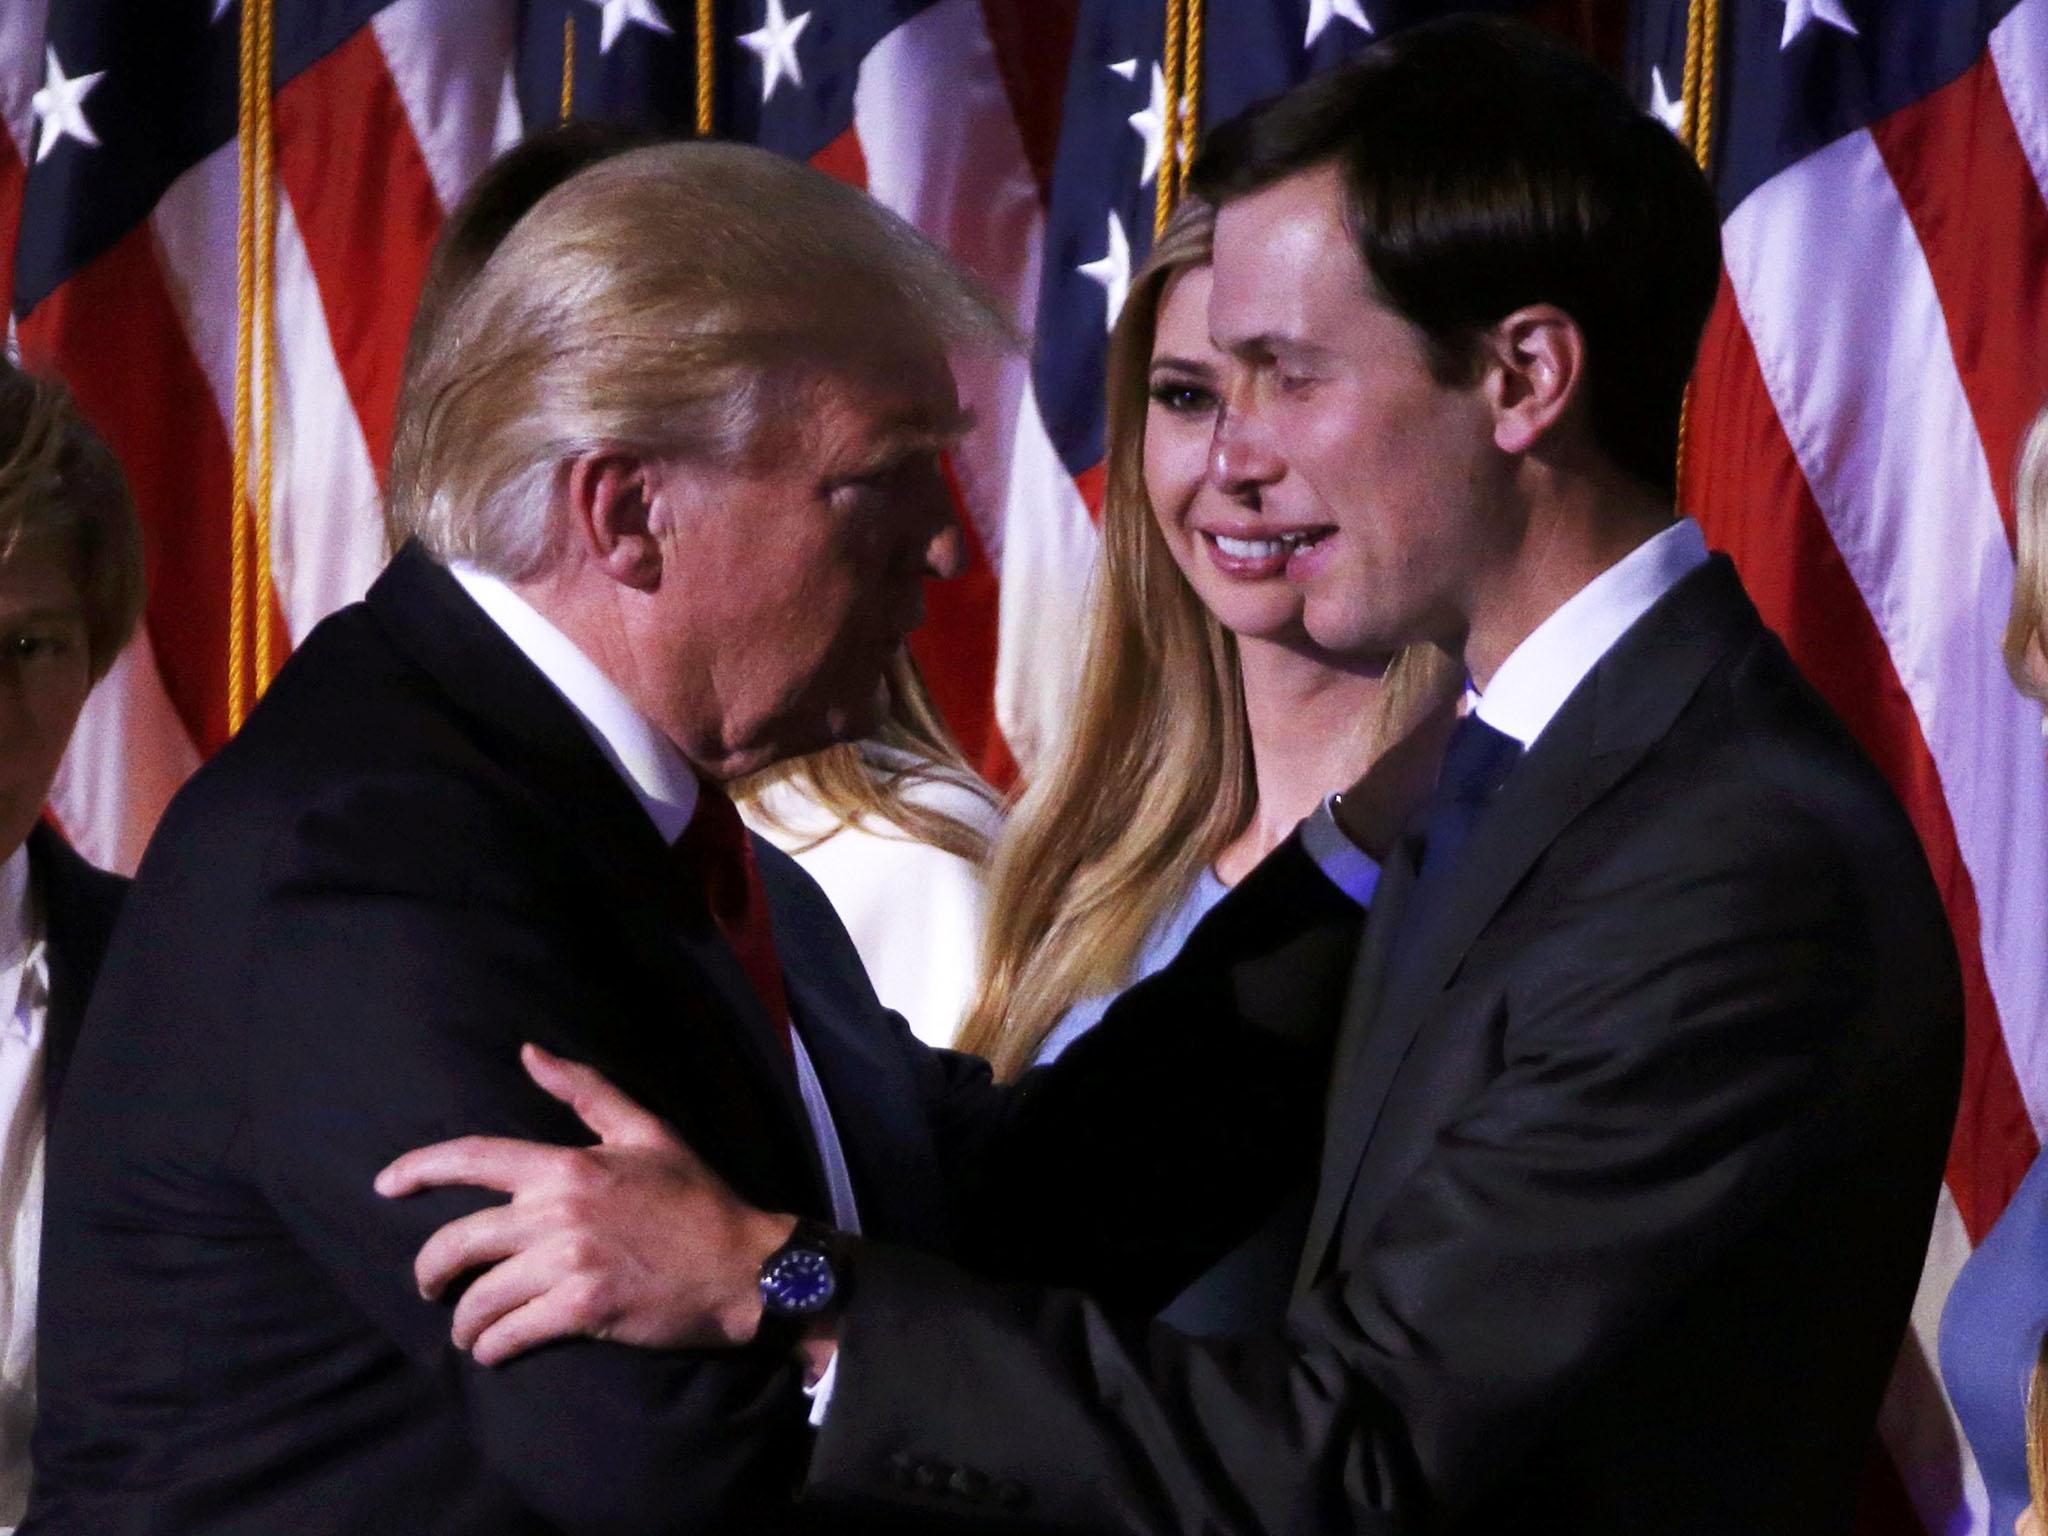 U.S. President-elect Donald Trump greets his daughter Ivanka and son in law Jared Kushner (R) at his election night rally in Manhattan, New York